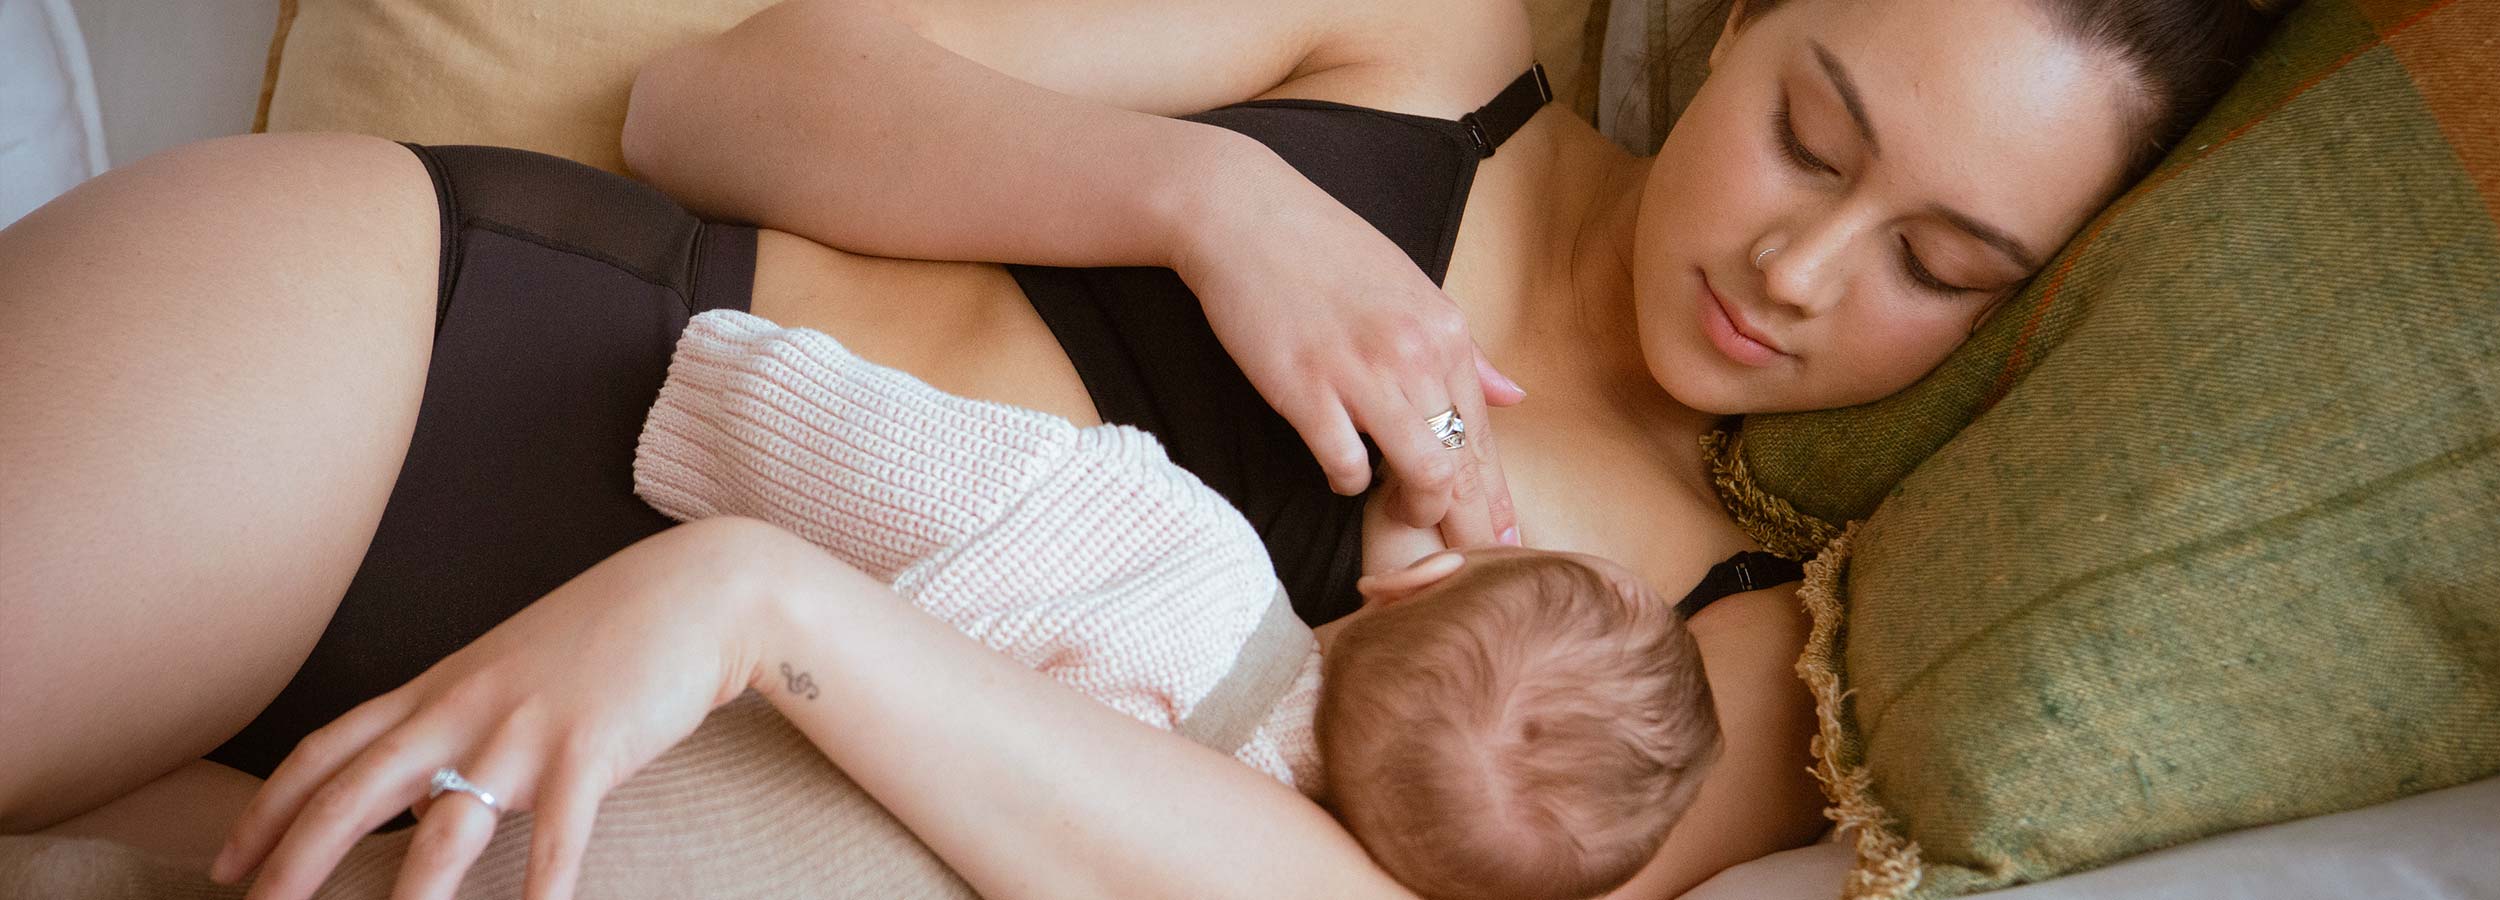 Woman in maternity lingerie breastfeeding baby on couch